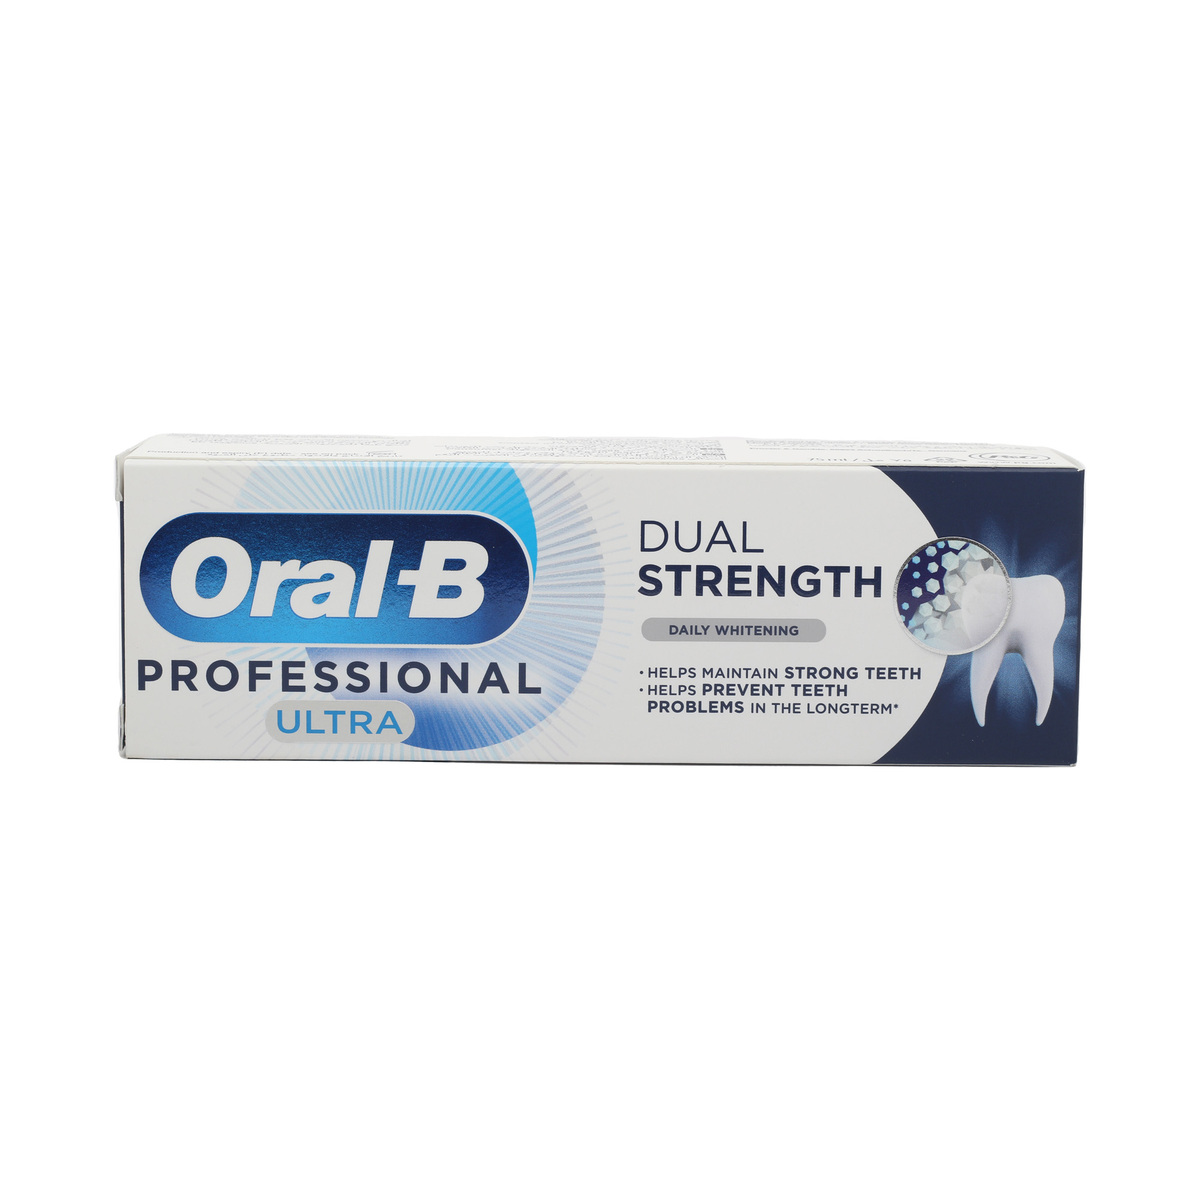 Oral-B Ultra Dual Strength Daily Whitening Toothpaste 75 ml